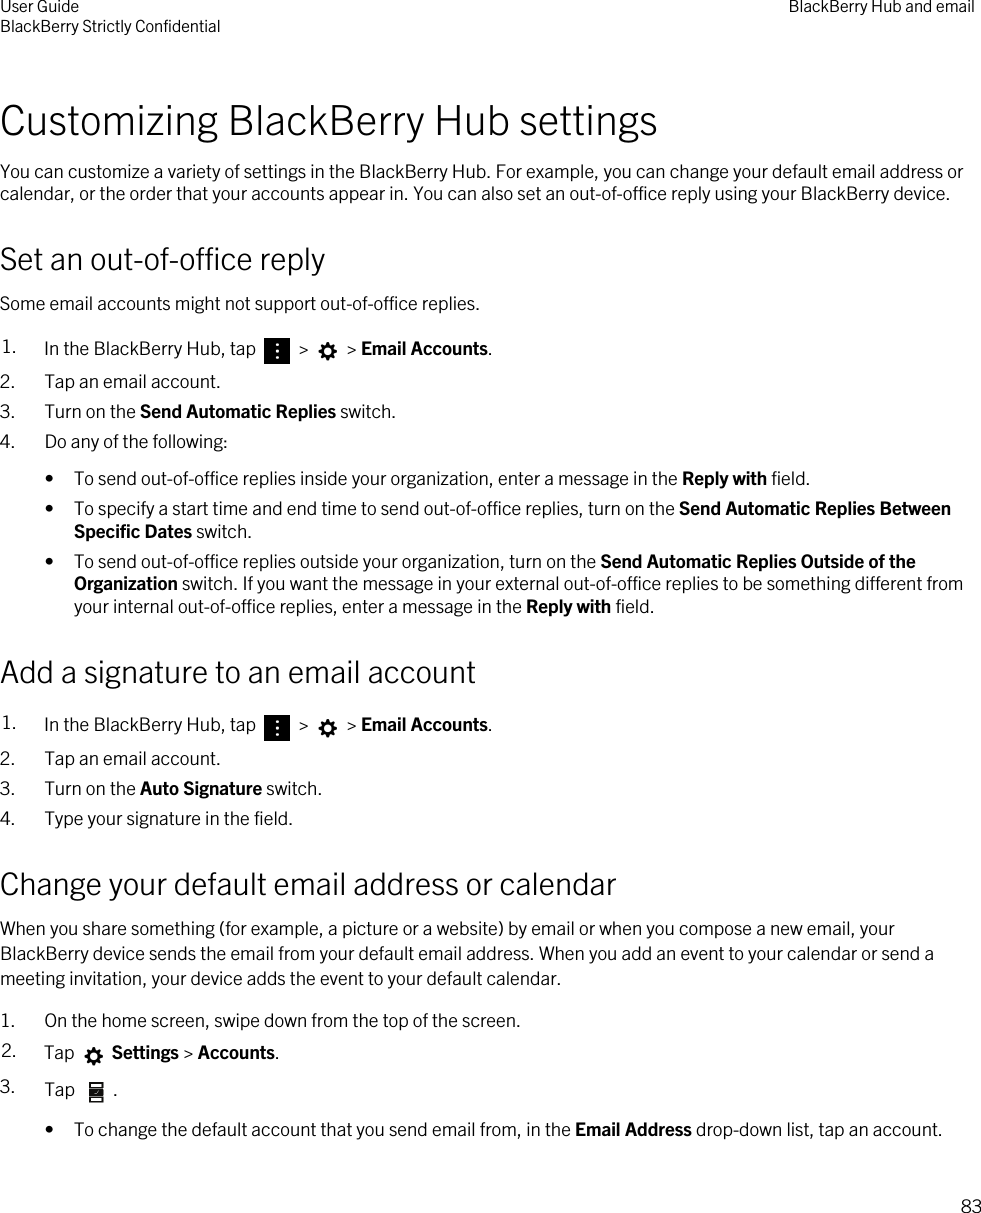 Customizing BlackBerry Hub settingsYou can customize a variety of settings in the BlackBerry Hub. For example, you can change your default email address or calendar, or the order that your accounts appear in. You can also set an out-of-office reply using your BlackBerry device.Set an out-of-office replySome email accounts might not support out-of-office replies.1. In the BlackBerry Hub, tap   &gt;   &gt; Email Accounts.2. Tap an email account.3. Turn on the Send Automatic Replies switch.4. Do any of the following:• To send out-of-office replies inside your organization, enter a message in the Reply with field.• To specify a start time and end time to send out-of-office replies, turn on the Send Automatic Replies Between Specific Dates switch.• To send out-of-office replies outside your organization, turn on the Send Automatic Replies Outside of the Organization switch. If you want the message in your external out-of-office replies to be something different from your internal out-of-office replies, enter a message in the Reply with field.Add a signature to an email account1. In the BlackBerry Hub, tap   &gt;   &gt; Email Accounts.2. Tap an email account.3. Turn on the Auto Signature switch.4. Type your signature in the field.Change your default email address or calendarWhen you share something (for example, a picture or a website) by email or when you compose a new email, your BlackBerry device sends the email from your default email address. When you add an event to your calendar or send a meeting invitation, your device adds the event to your default calendar.1. On the home screen, swipe down from the top of the screen.2. Tap   Settings &gt; Accounts.3. Tap  .• To change the default account that you send email from, in the Email Address drop-down list, tap an account.User GuideBlackBerry Strictly Confidential BlackBerry Hub and email83